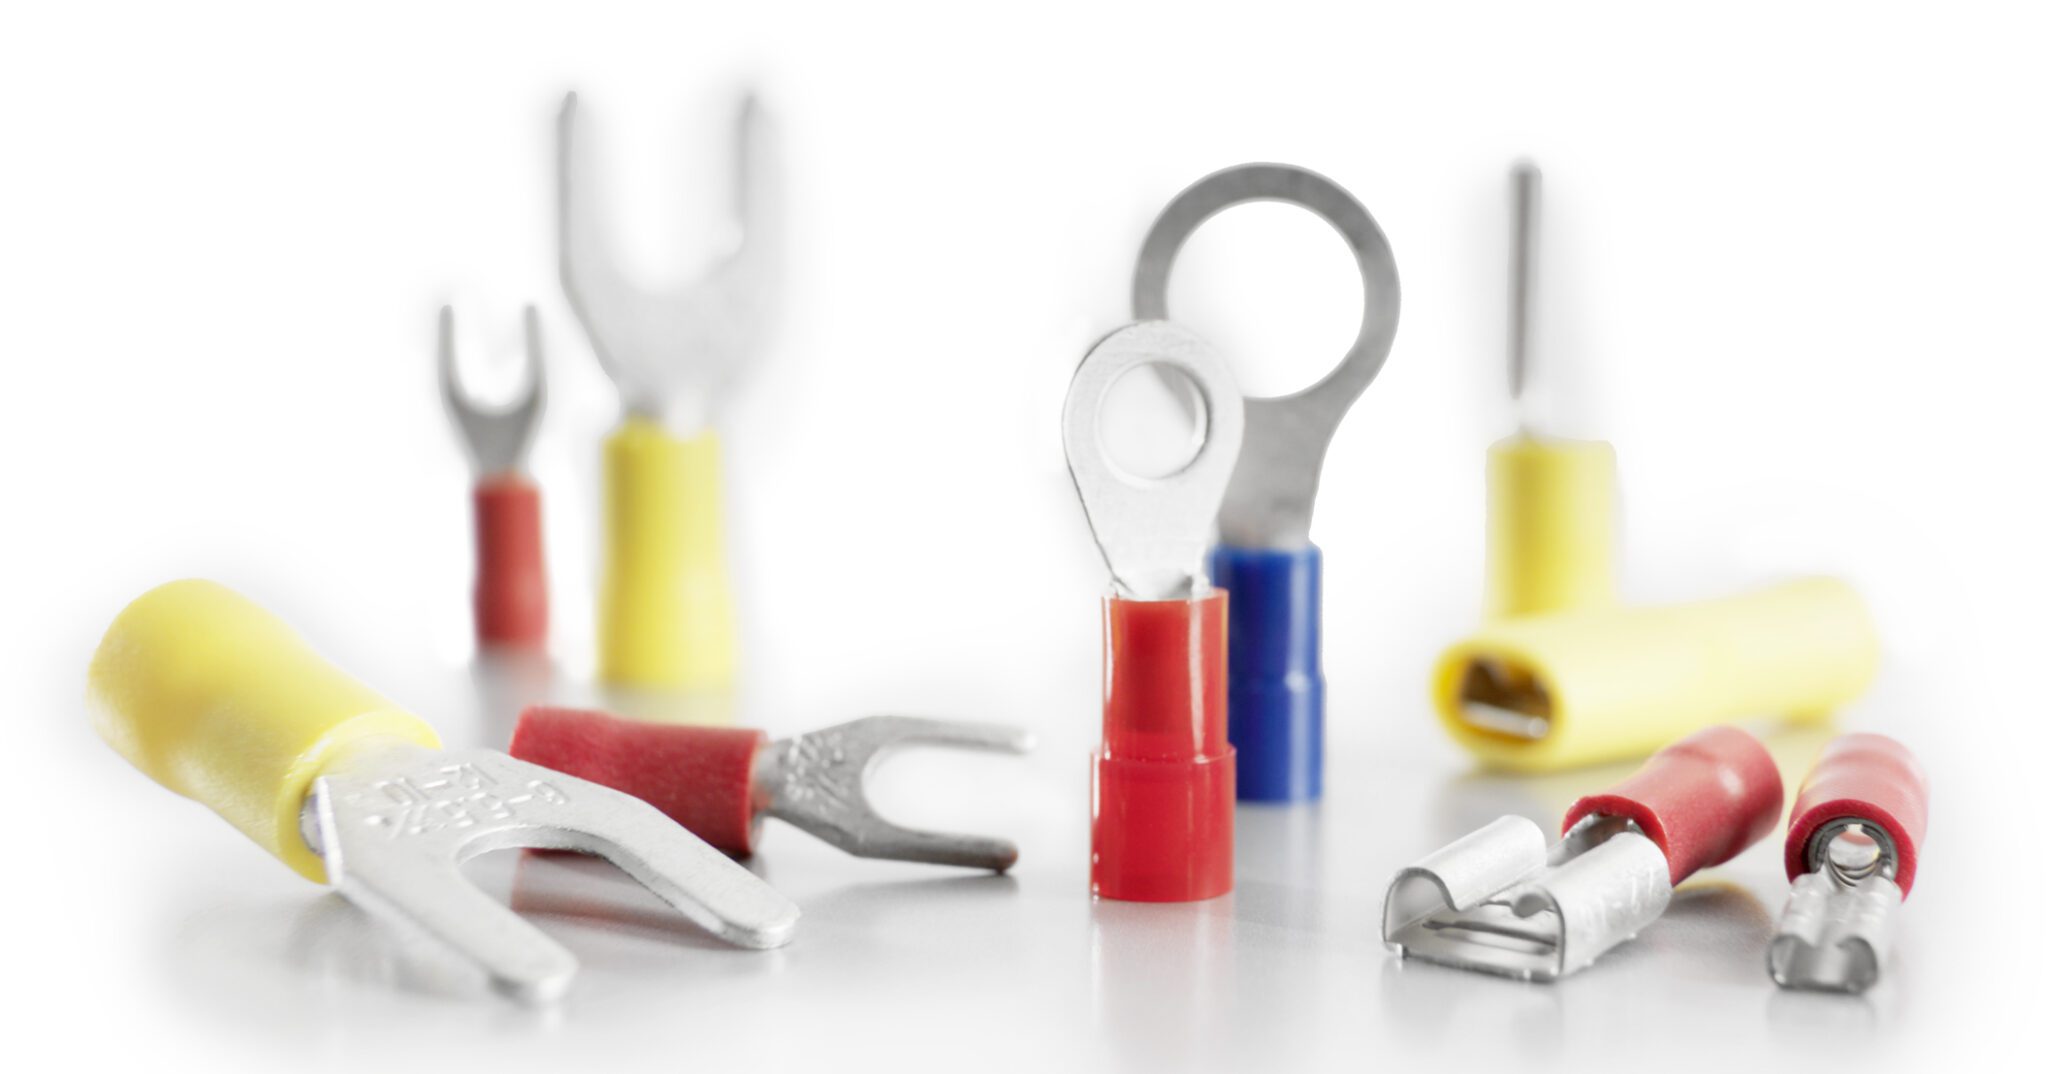 Weidmuller USA offers a wide range of insulated and non-insulated cable lugs and connectors